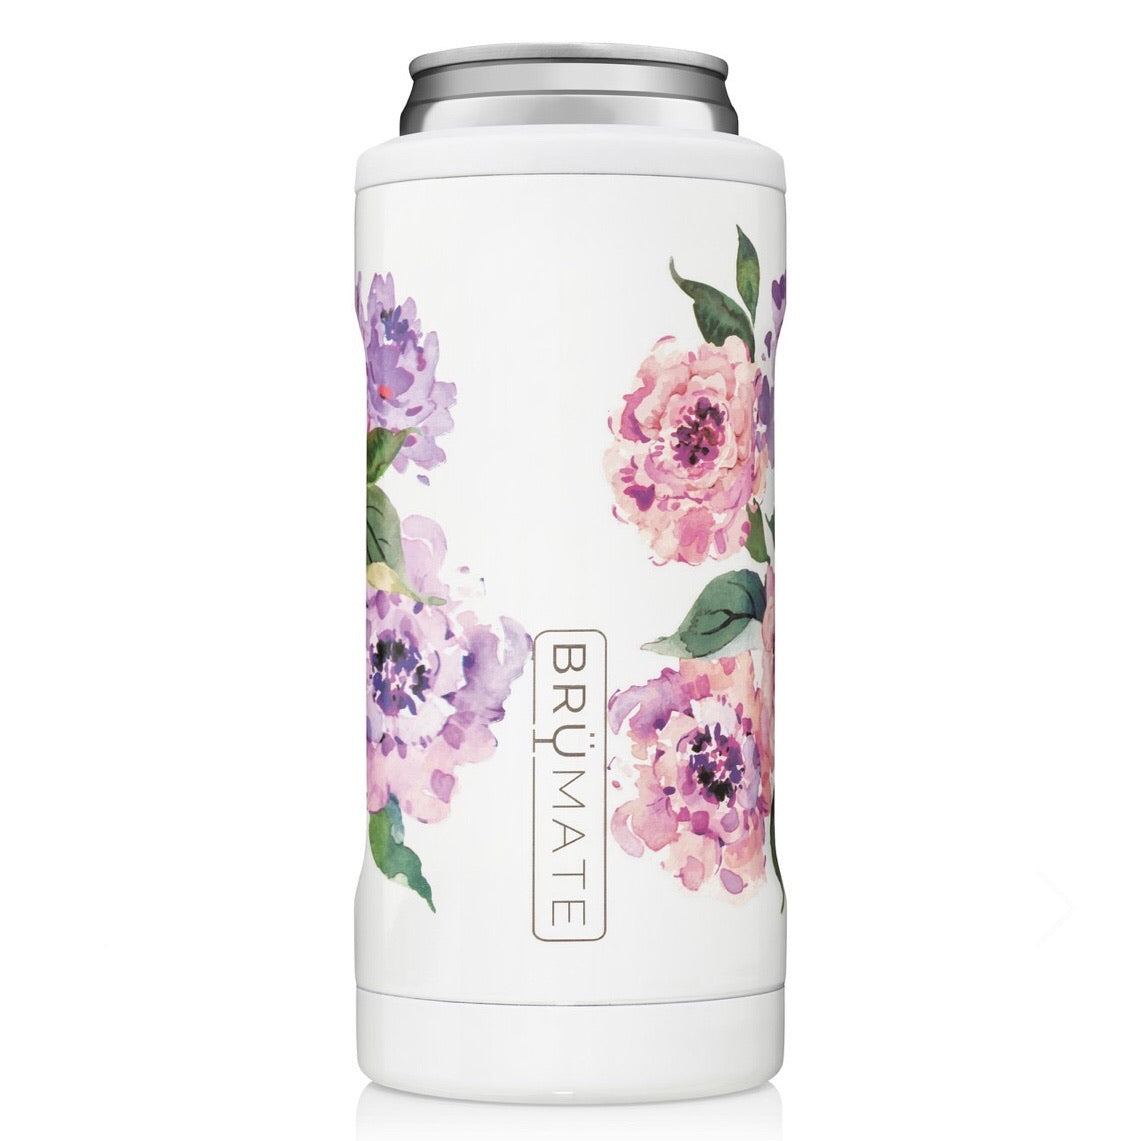 slim cans leak-proof drinkware hot to cold insulated drinkware tumbler like yeti brumate spillproof floral peonies flowers